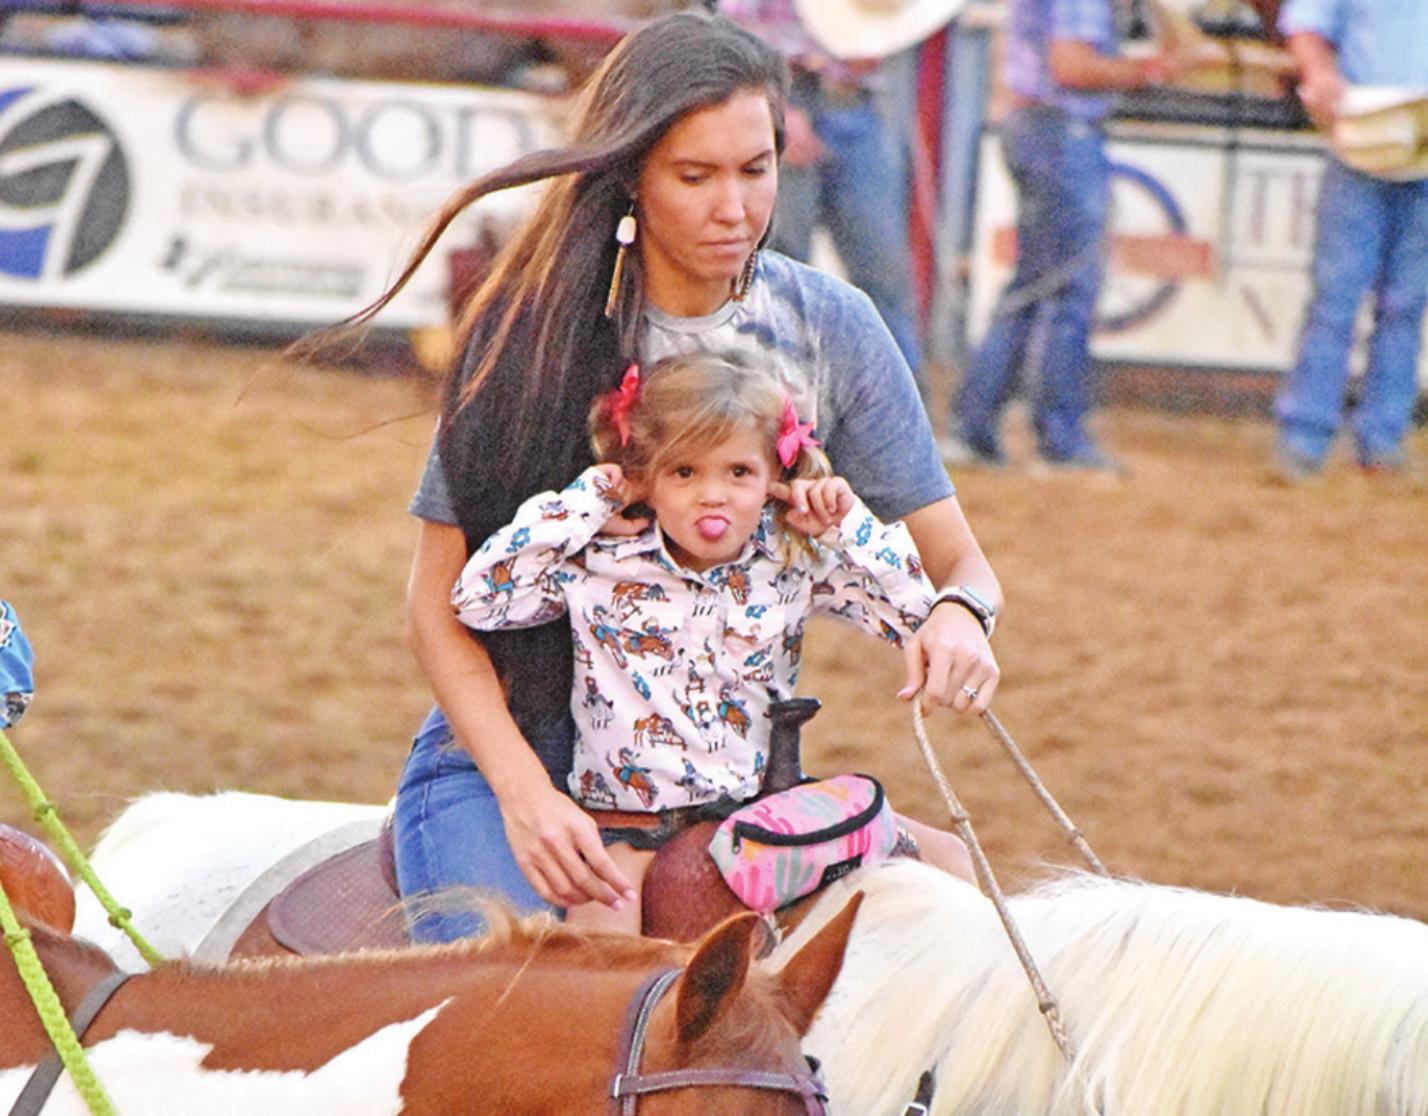 Naples Rodeo winds down 75th annual event Daingerfield Bee